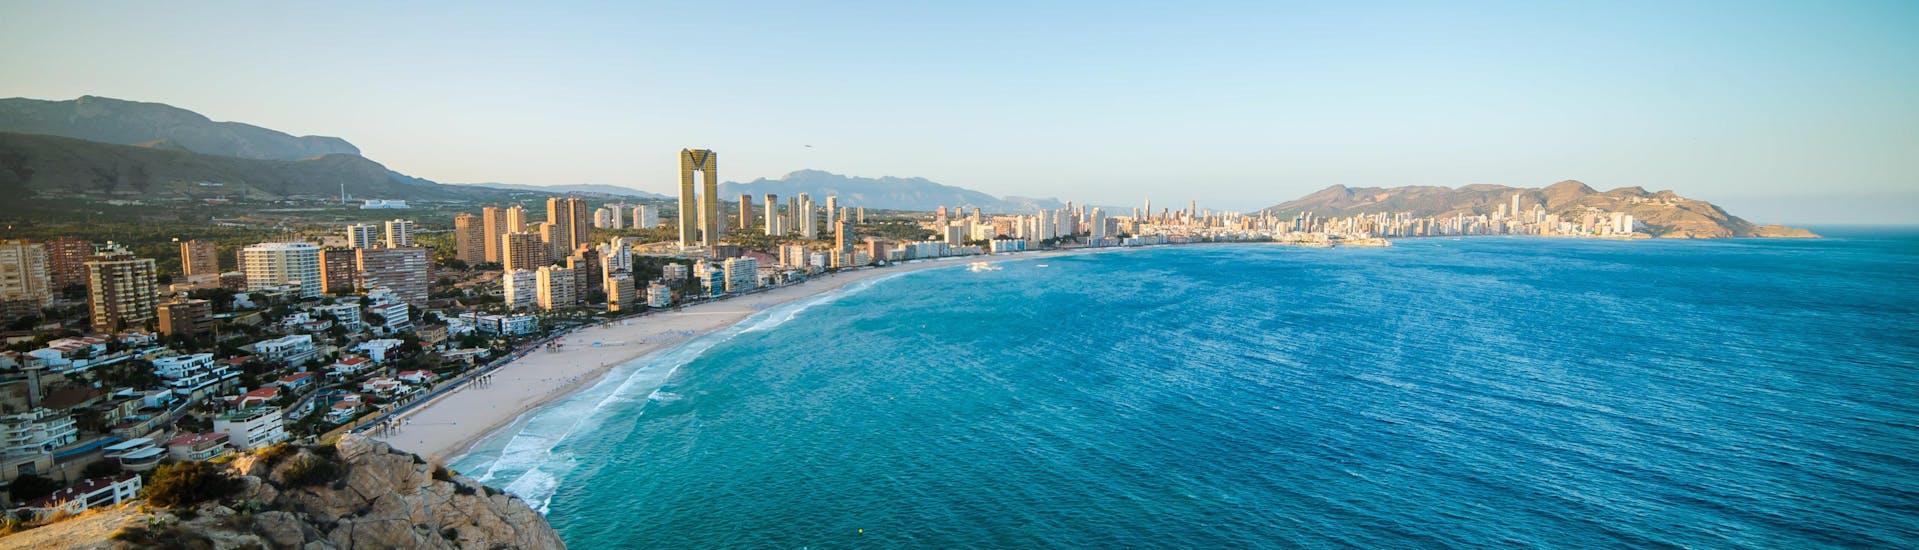 An image of the sandy beach on which you can ride a jet ski and do other water sports activities in Benidorm.